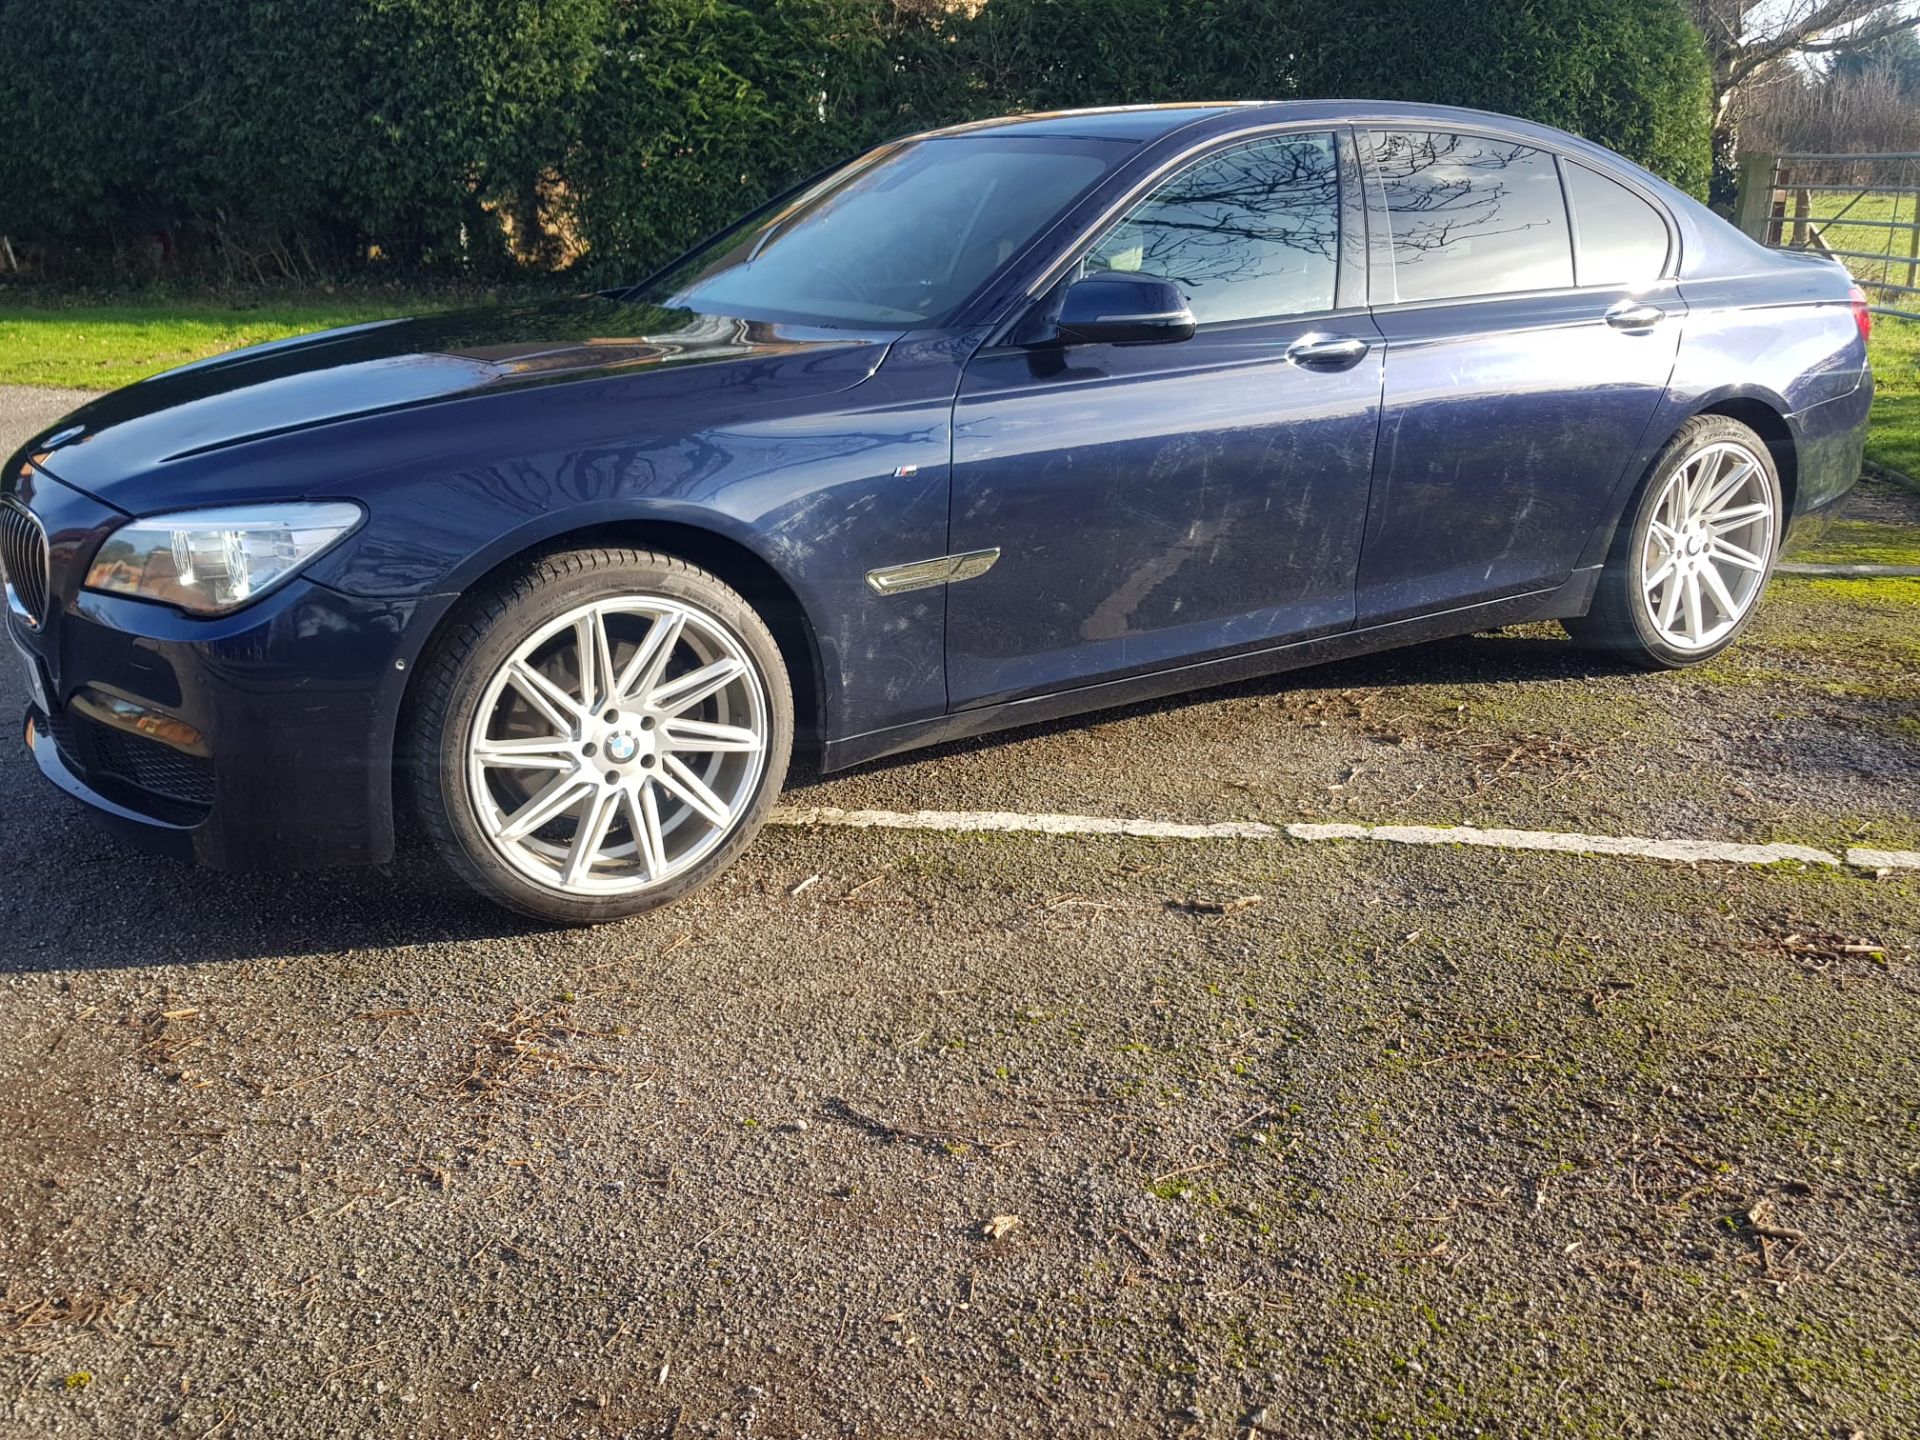 2014 730D M-SPORT SALOON - FULL SERVICE HISTORY - 115K MILES - Image 29 of 43